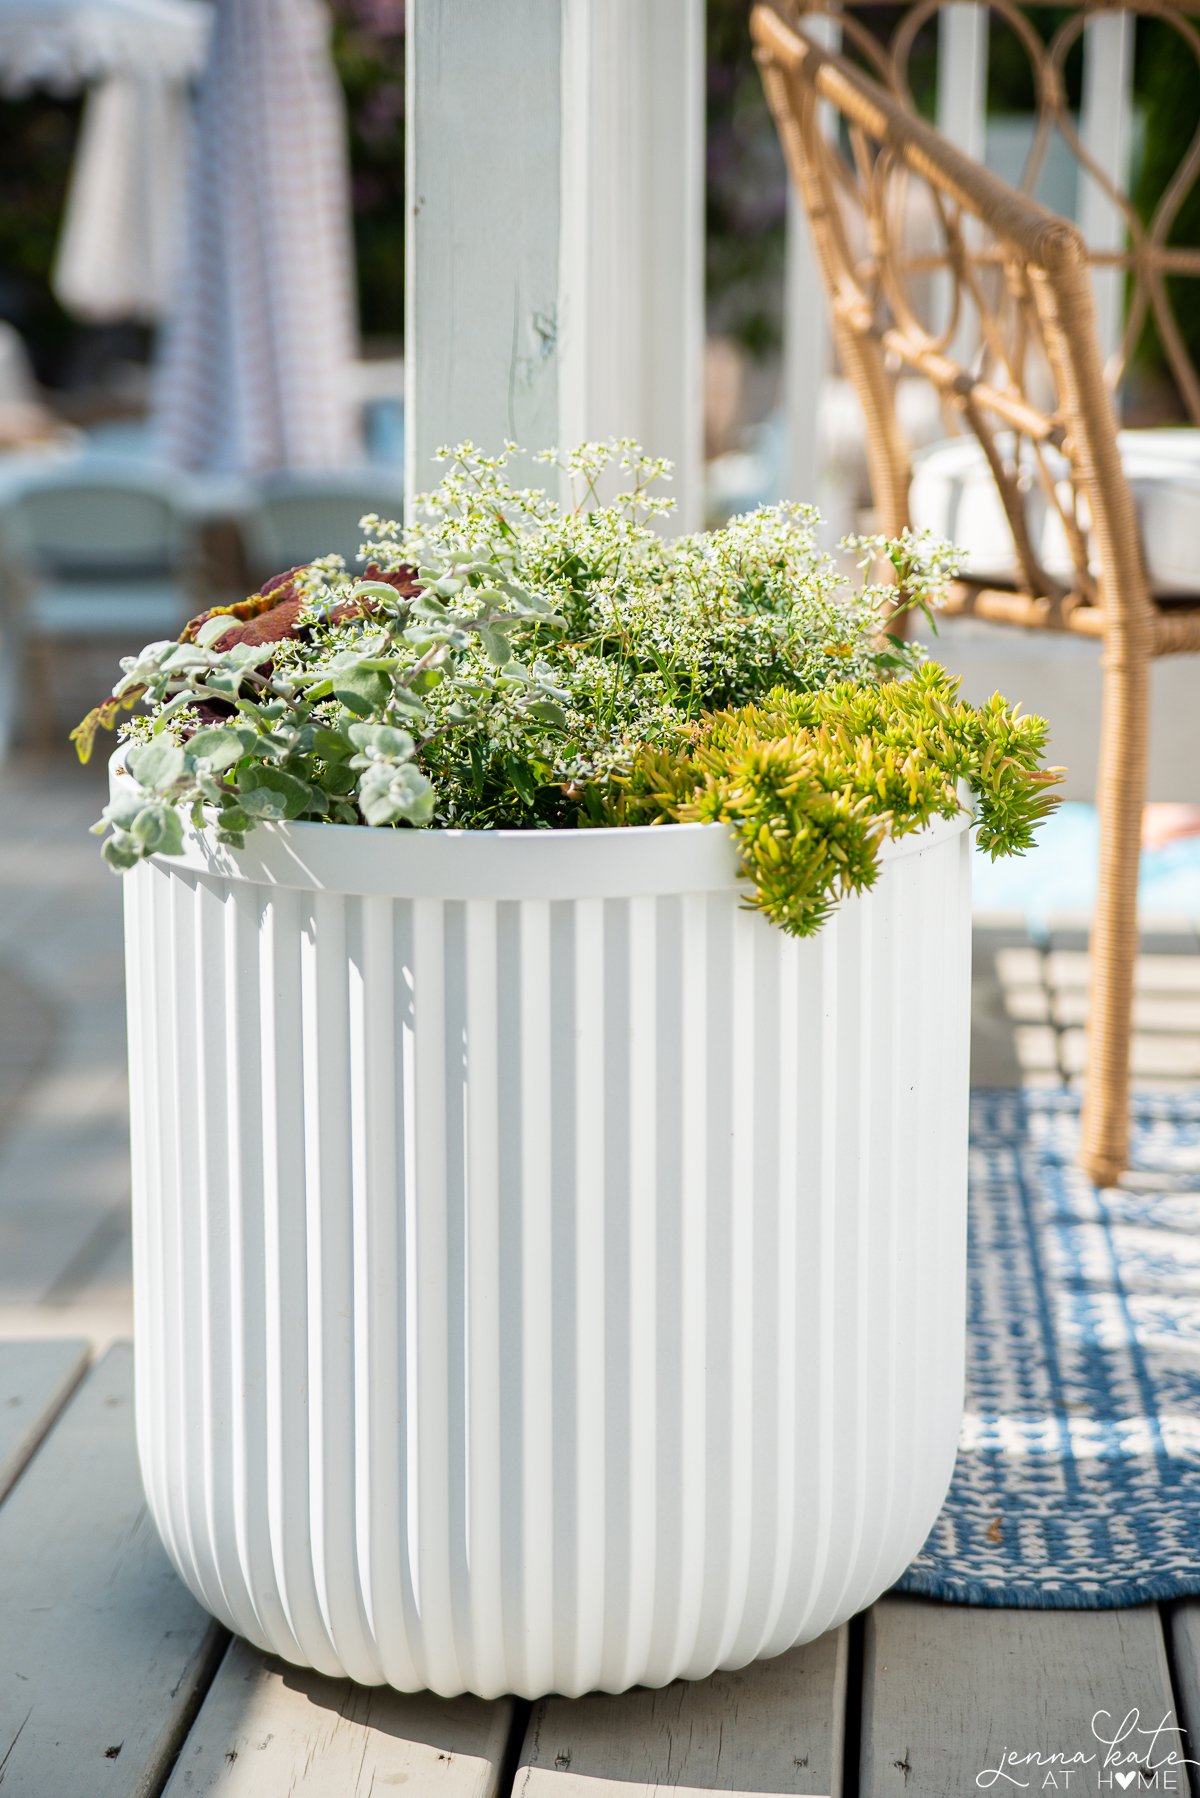 Large white planter on deck filled with green and white plants